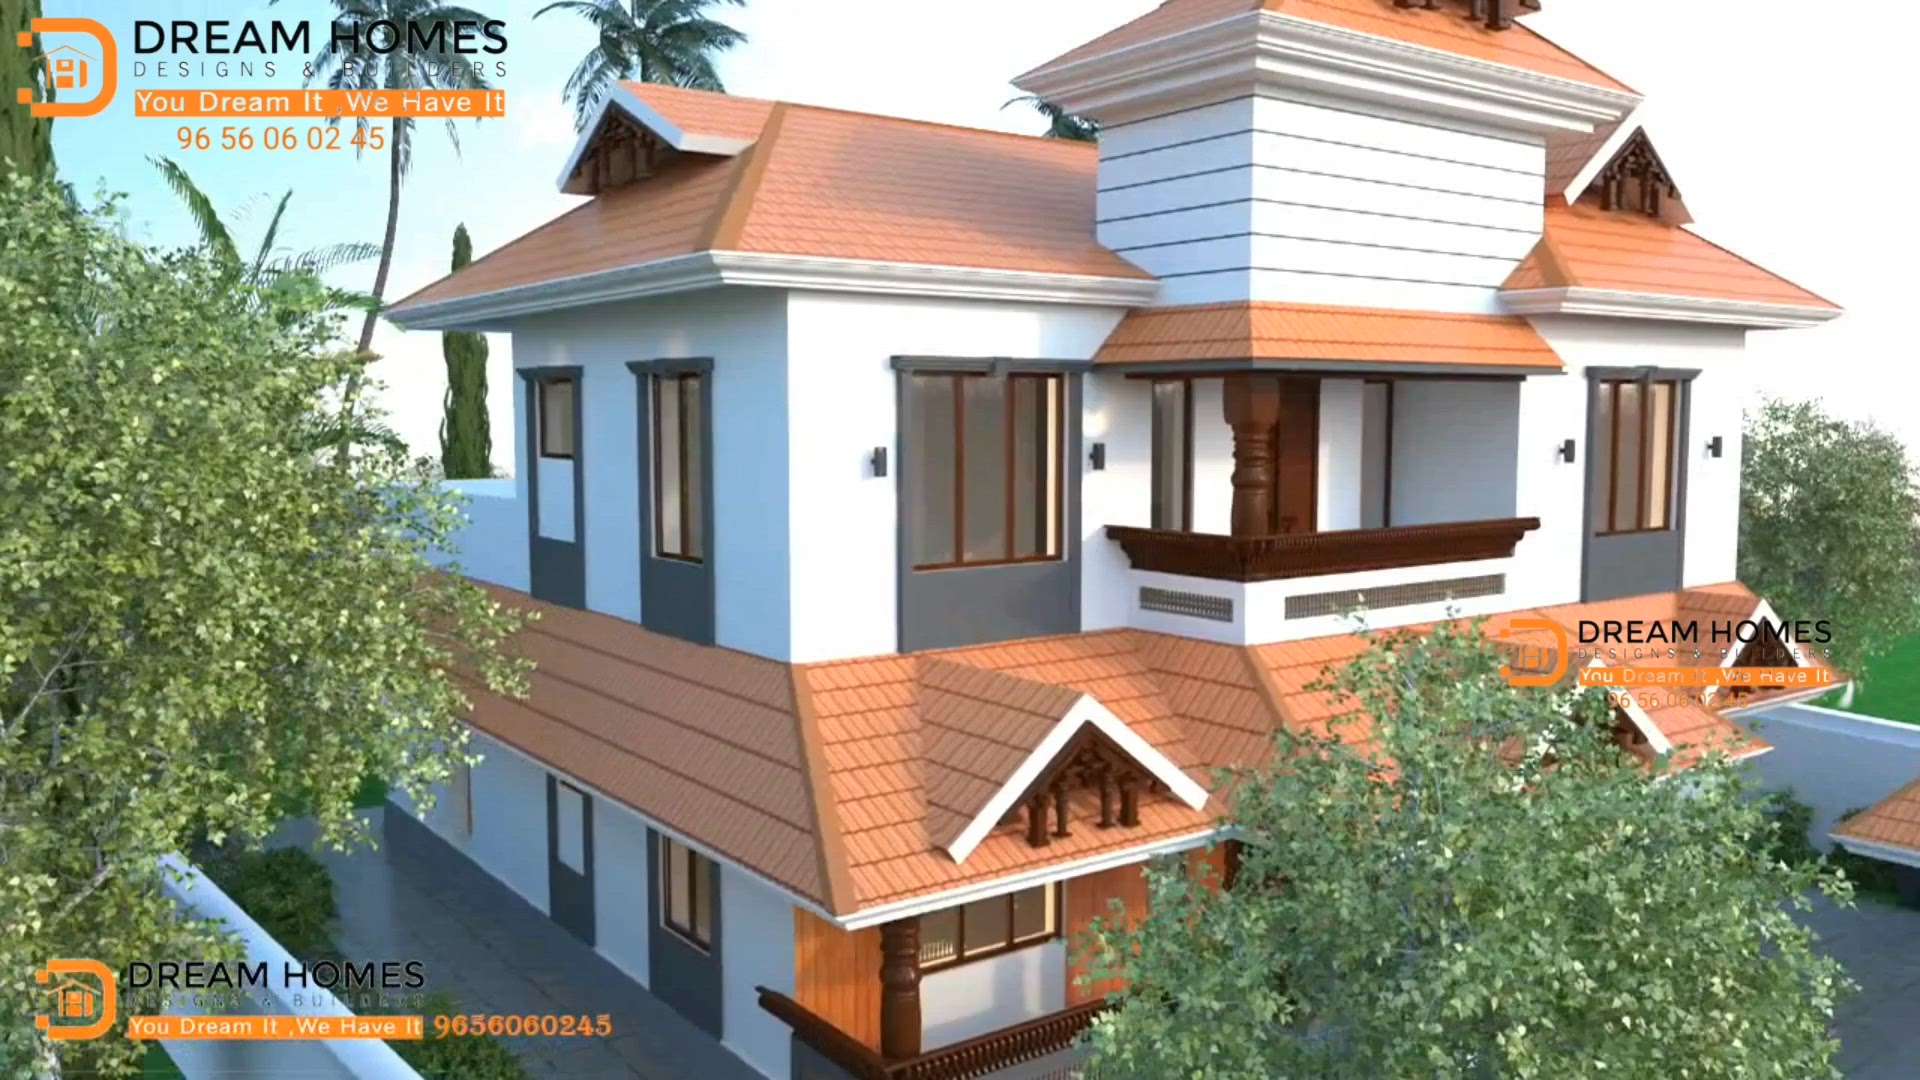 "DREAM HOMES DESIGNS & BUILDERS "
           You Dream It, We Have It'
"Kerala's No 1 Architect for Traditional Homes"

"4BHK 2100 SQFT,Total Cost: 56,70,000/.service available in all over  kerala"

"A beautiful traditional structure  will be completed only with the presence of a good Architect and pure Vasthu Sastra.

Dream Homes will always be there whenever we are needed.

We are providing service to all over India 
No Compromise on Quality, Sincerity & Efficiency.

#traditionalhome #traditional

For more info

9656060245
7902453187

www.dreamhomesbuilders.com